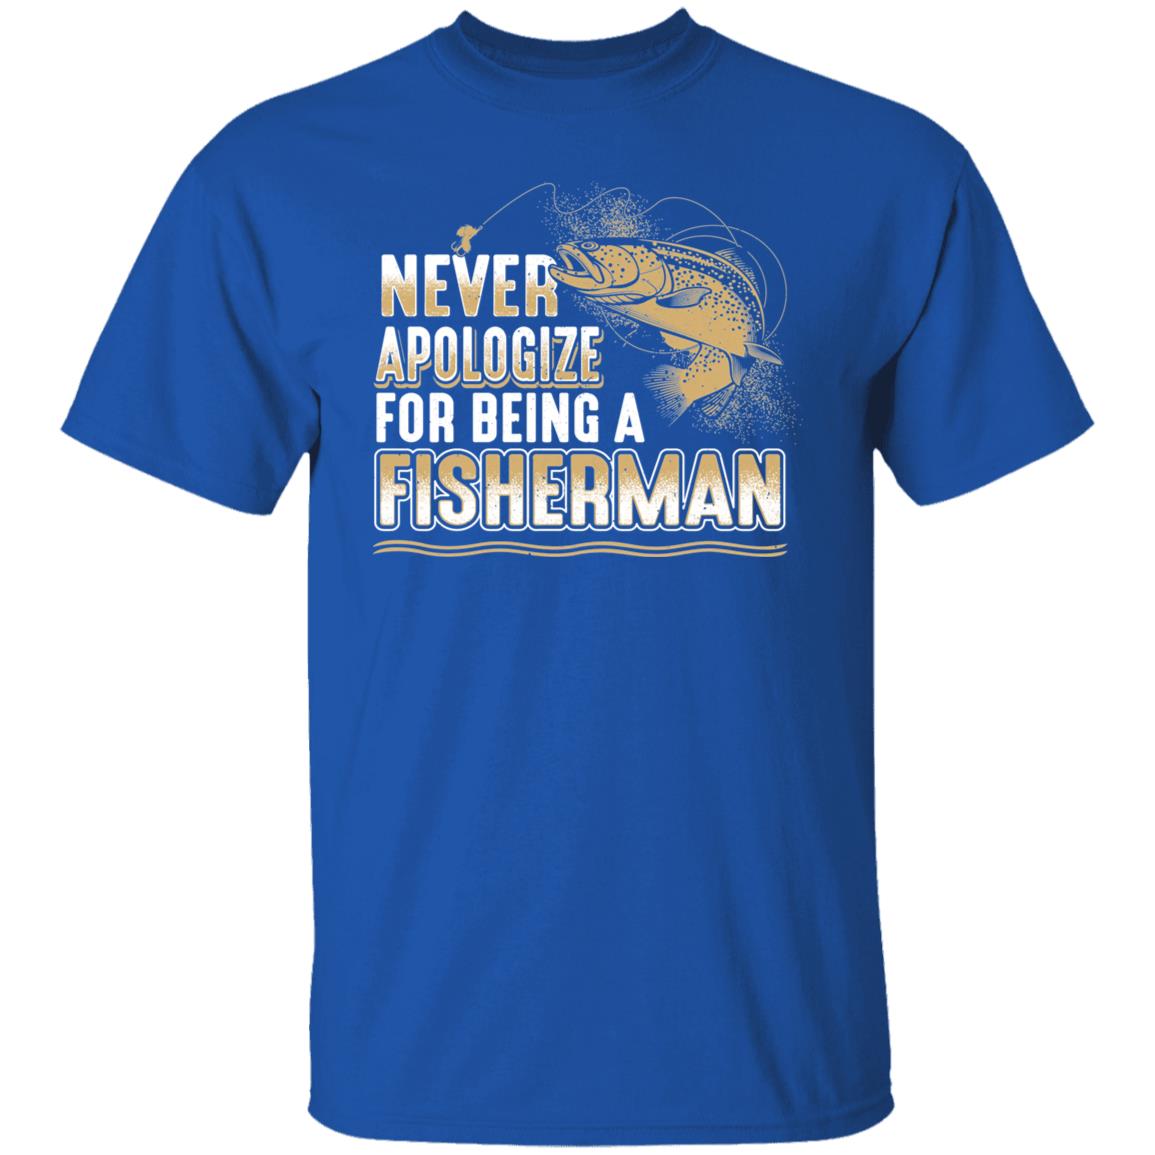 Never apologize for being a fisherman t-shirt royal